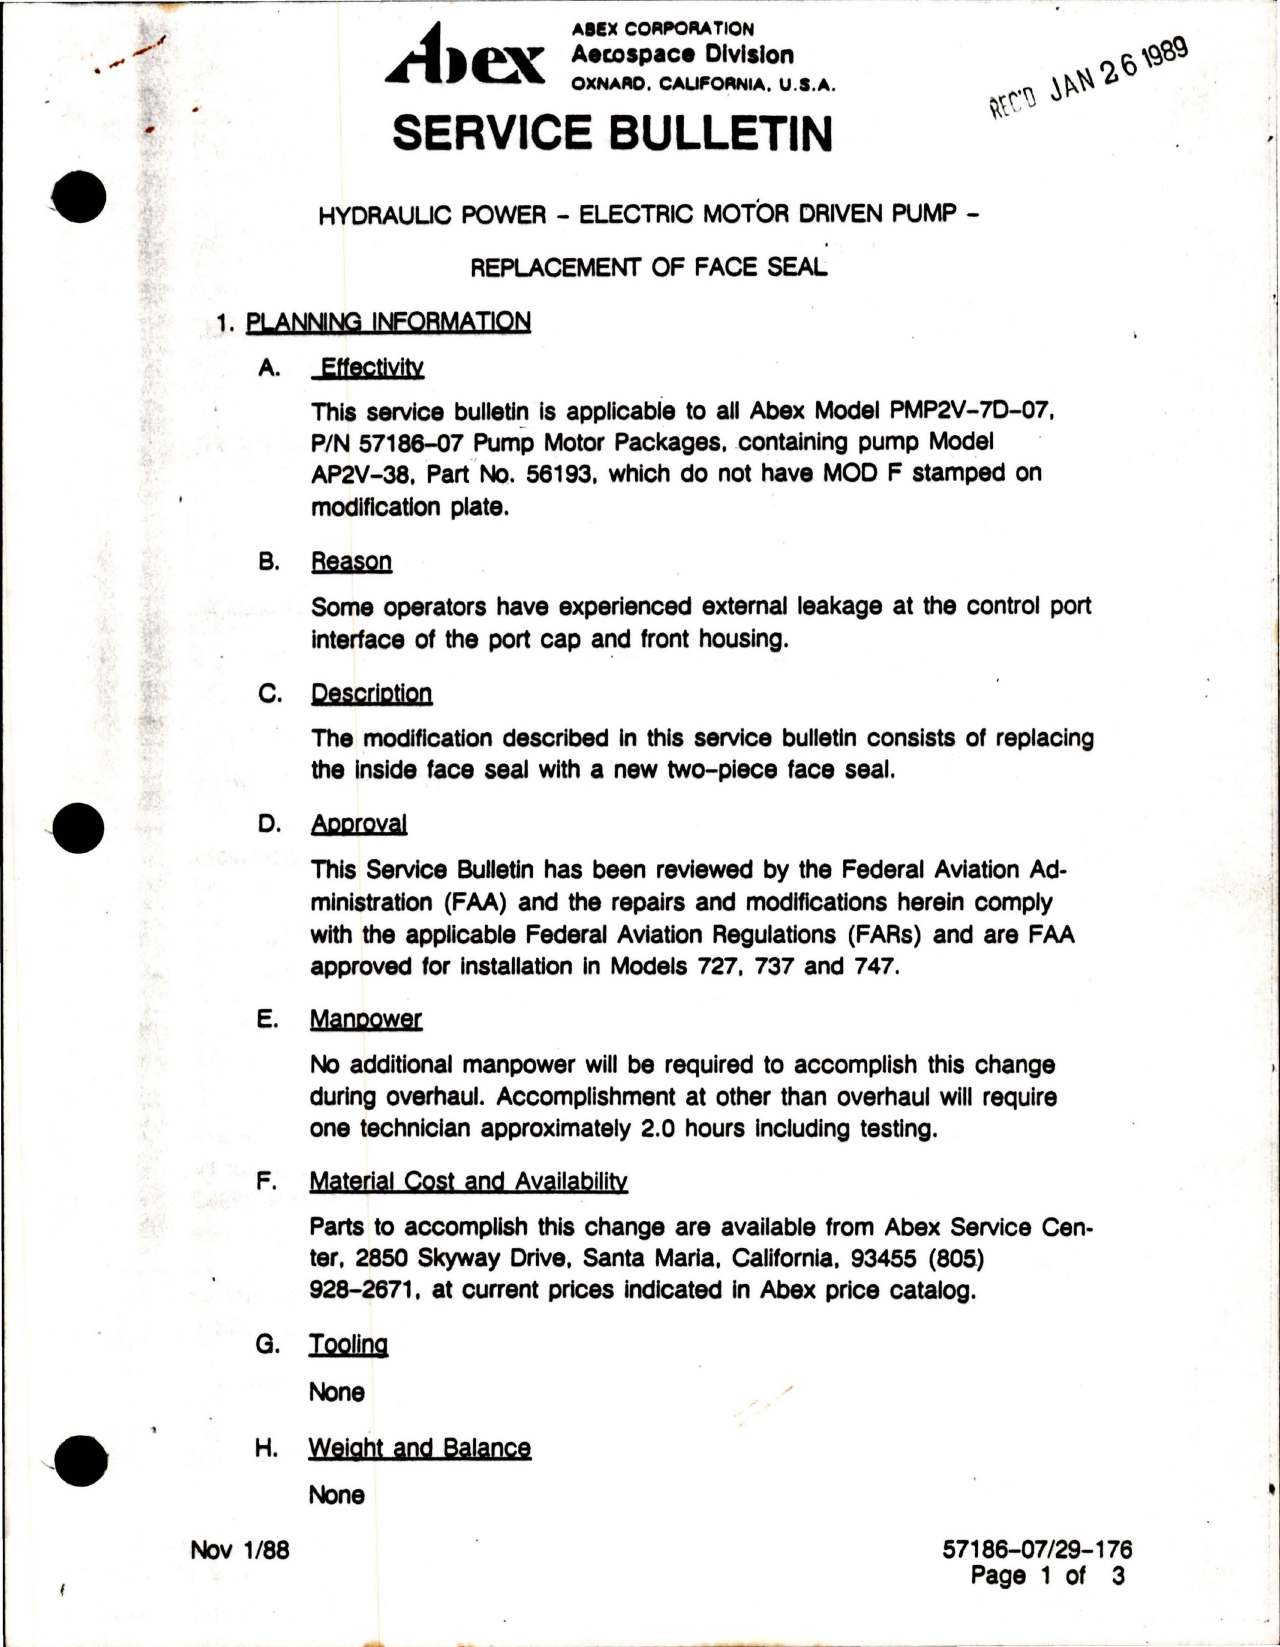 Sample page 1 from AirCorps Library document: Abex Hydraulic Power Electric Motor Driven Pump - Replacement of Face Seal